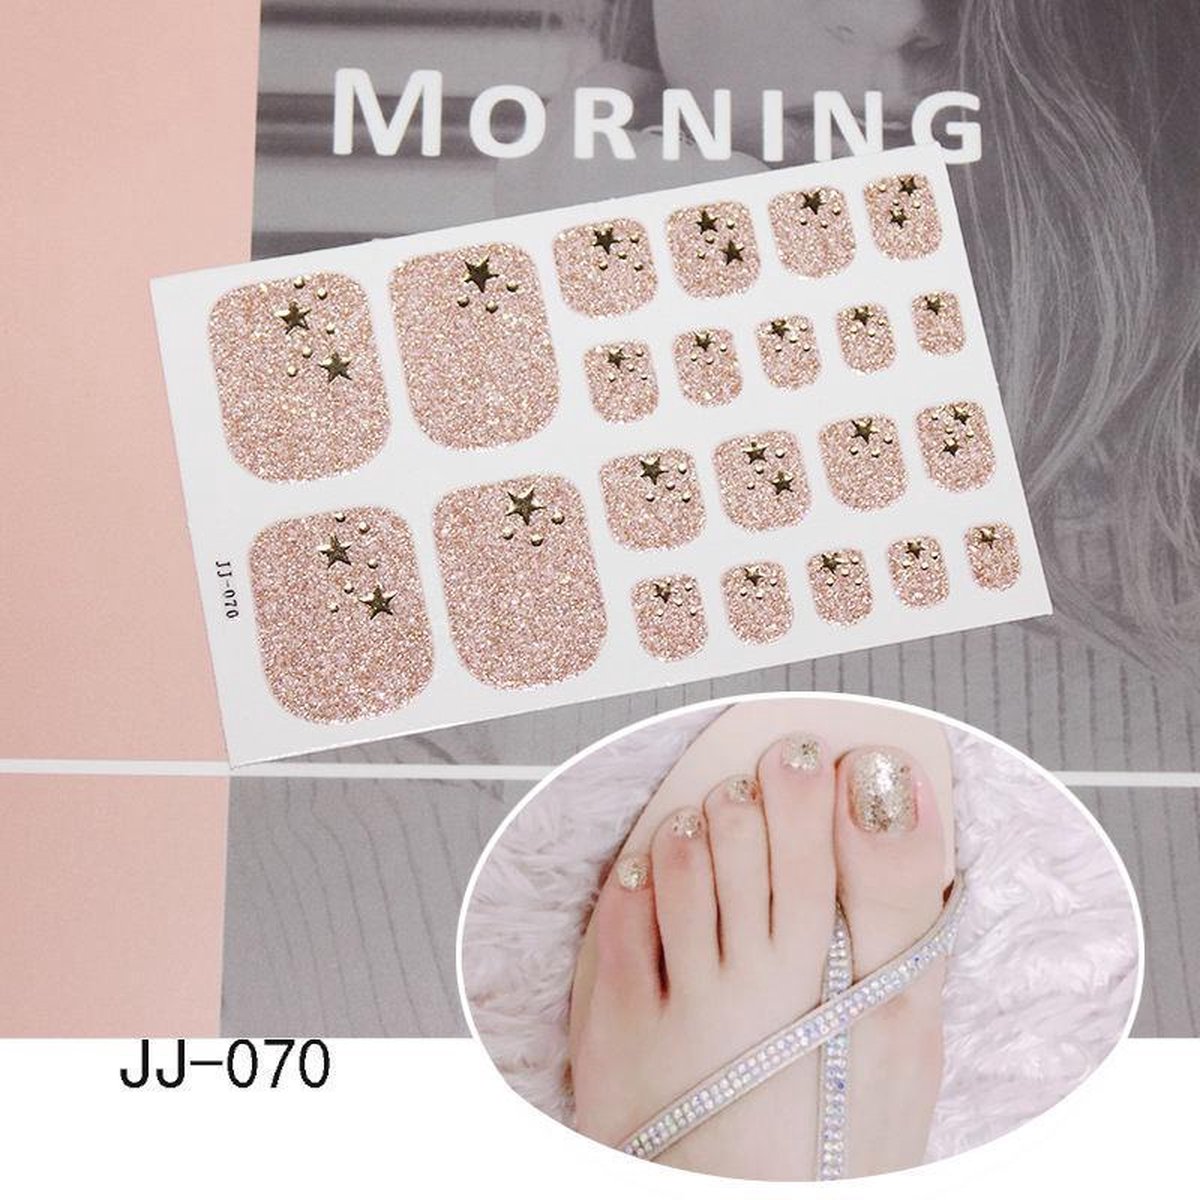 Prachtige Teen Nagel Stickers/ 1 vel , 22 tips/ Manicure Teen Nagel stickers,Nageldecoratie,Nagellak,Plaknagels / Nail stickers Goud